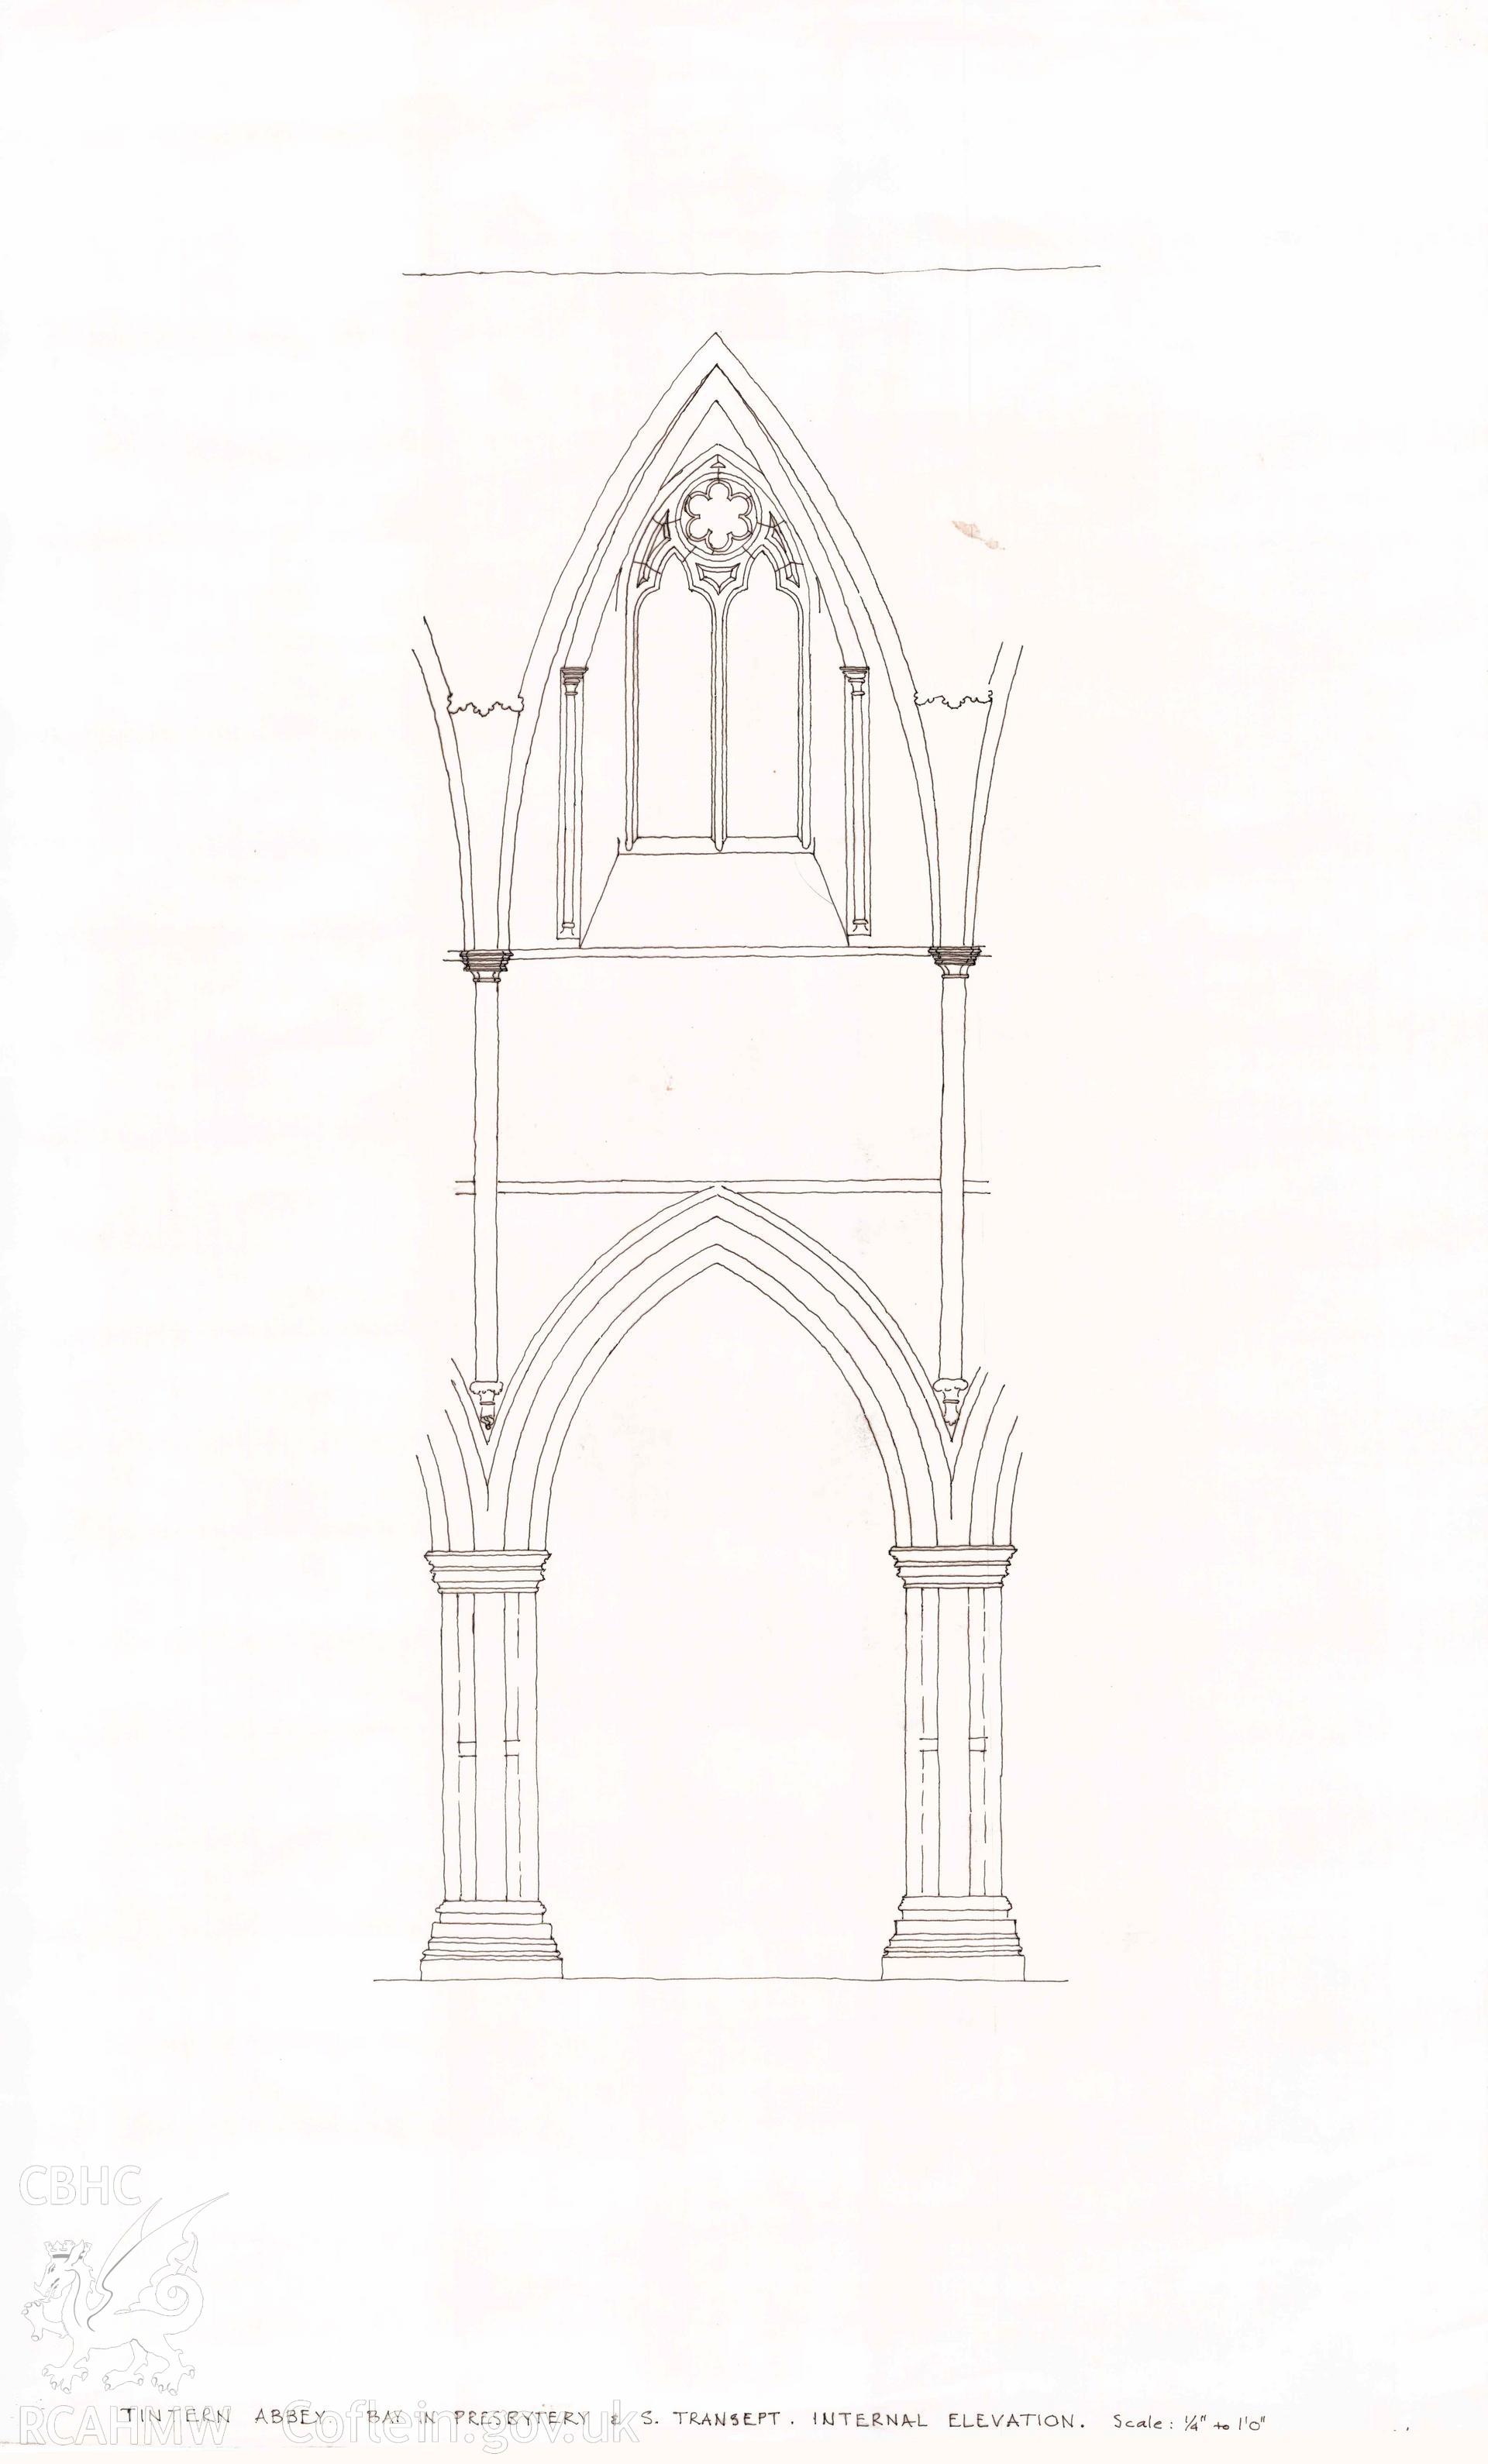 Cadw guardianship monument drawing, bay in Presbytery and south transept, internal elevation, sketch survey of condition, Tintern Abbey.